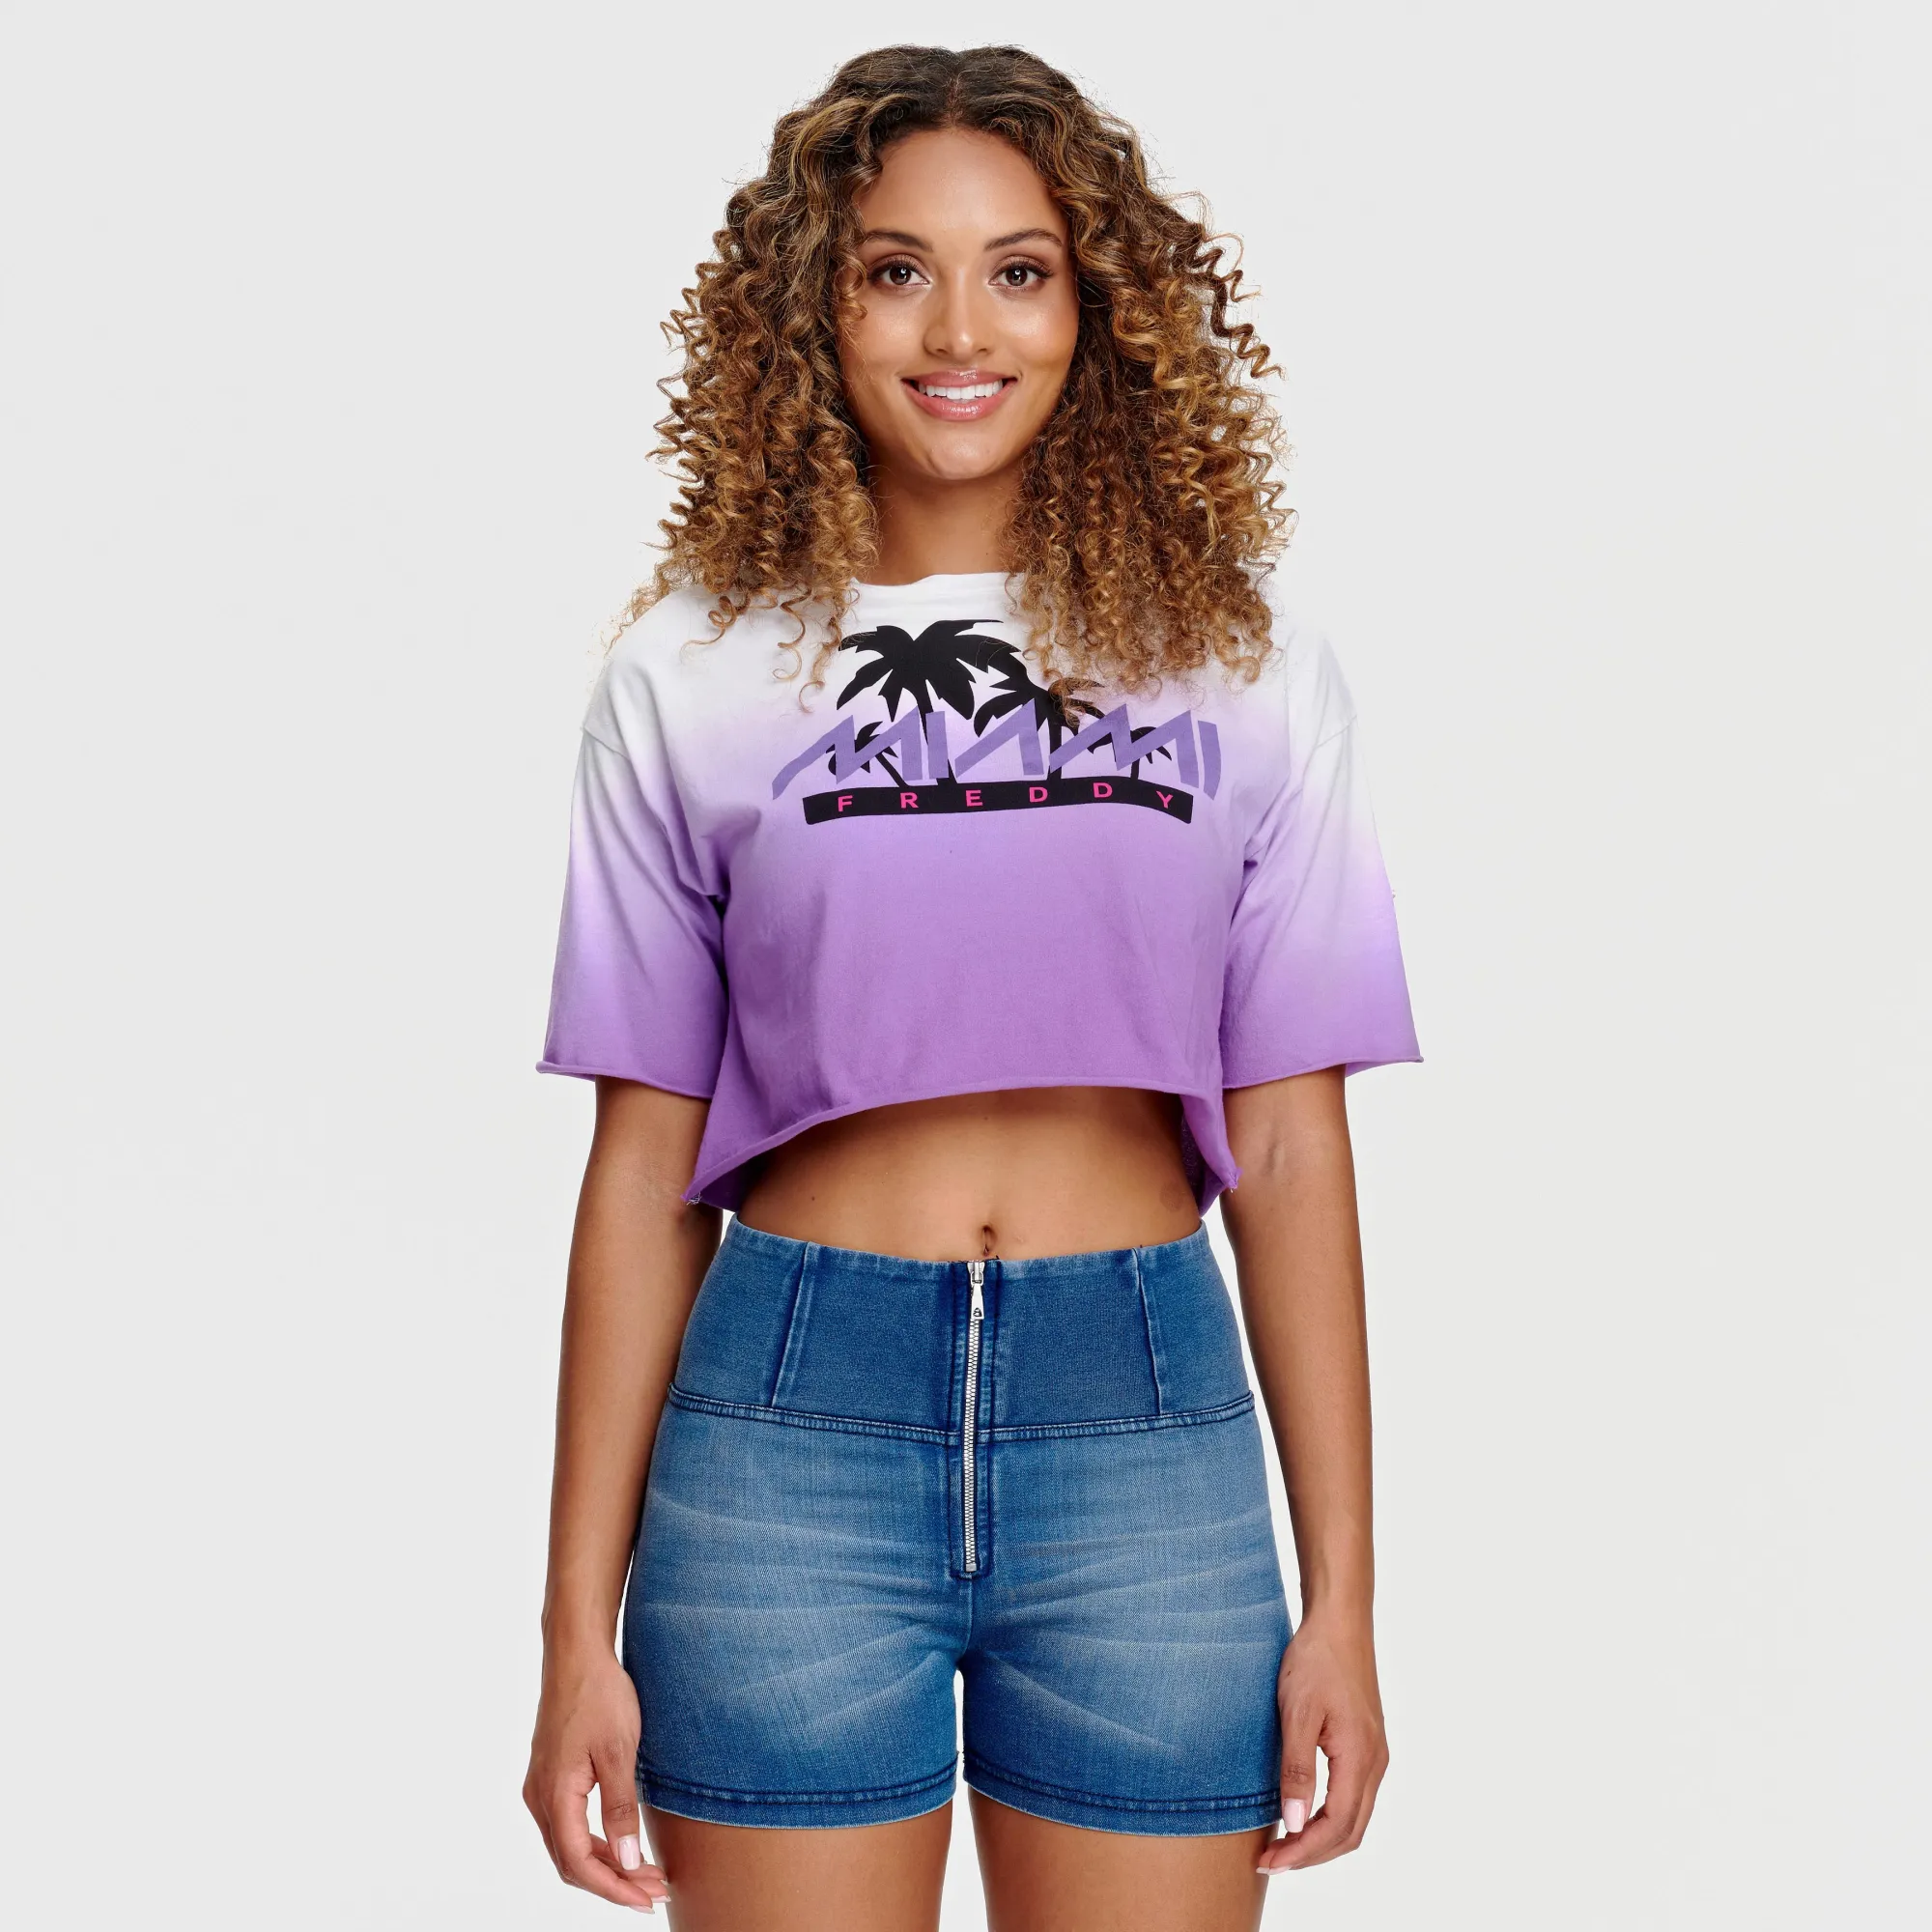 Freddy T-Shirt - in Oversize-Passform - Cropped - Freddy Miami Print - White - Chive Blossom - WE530